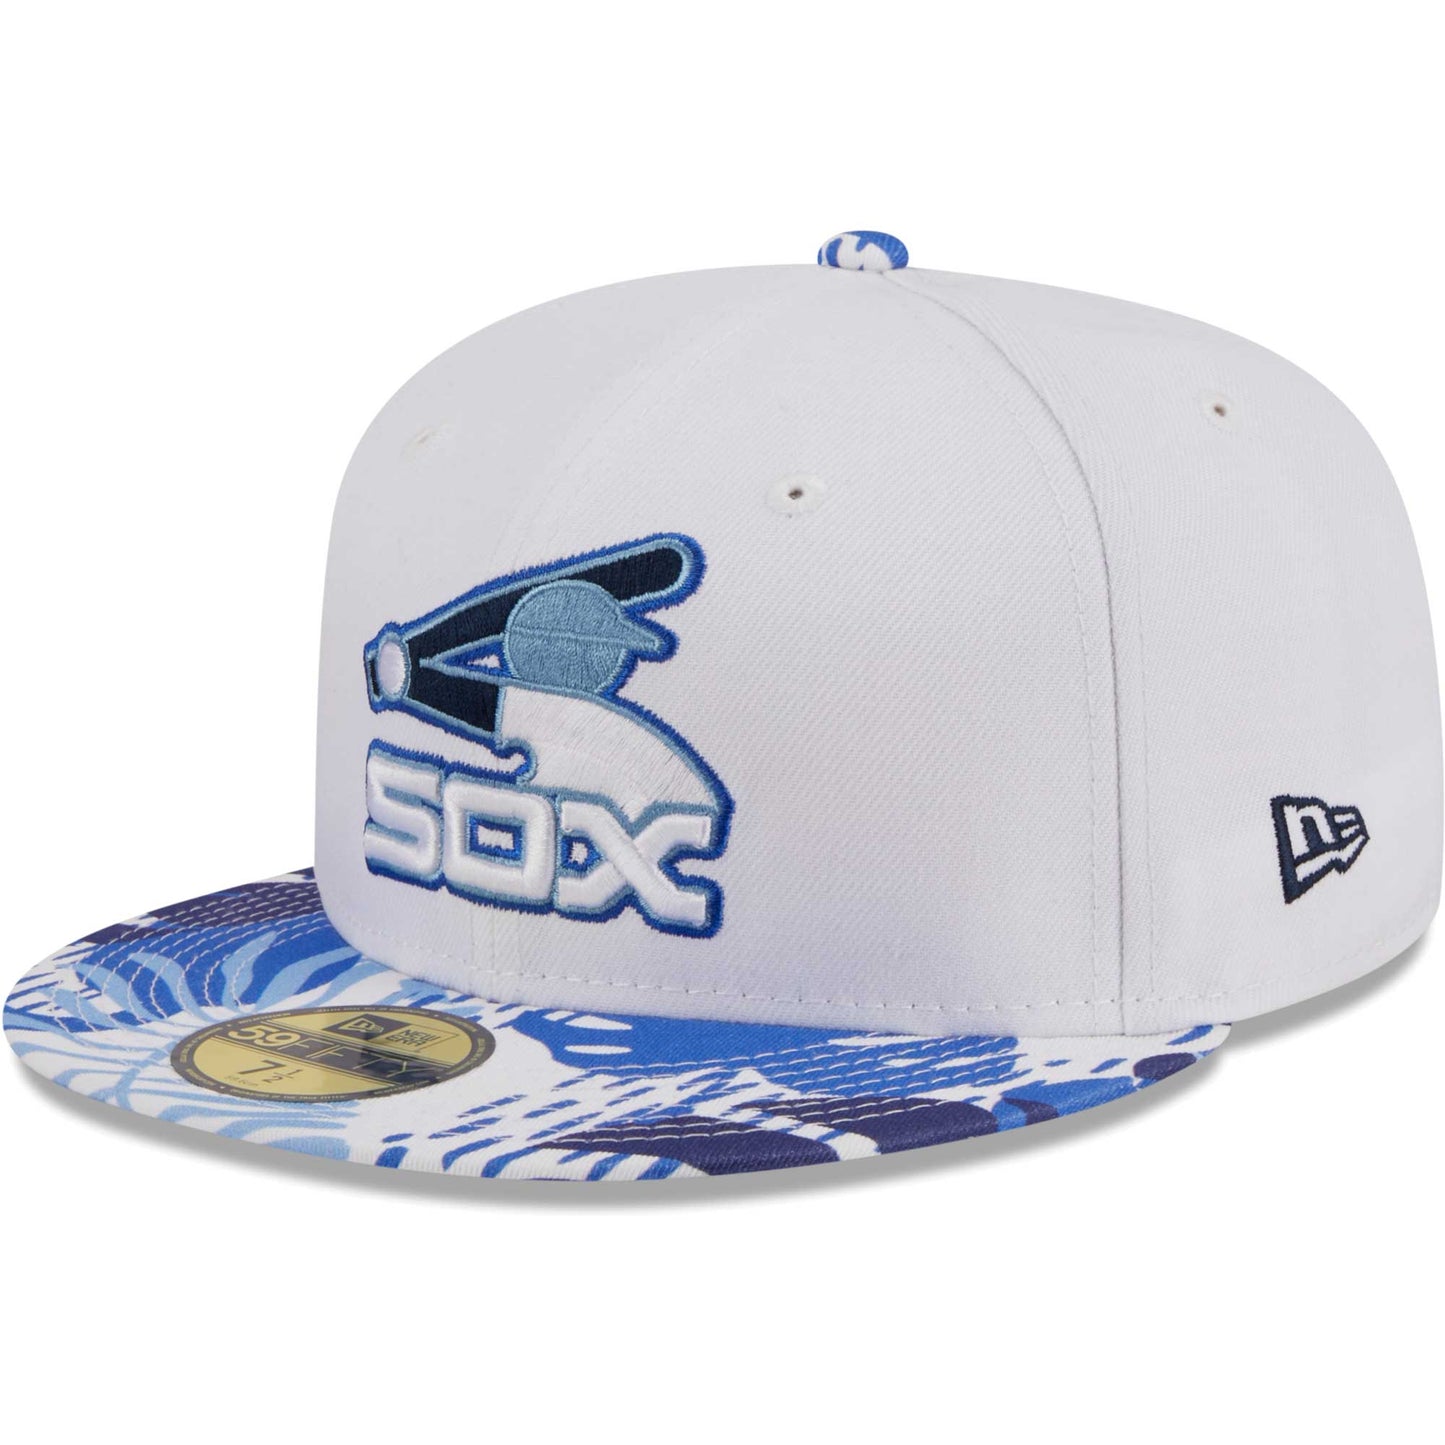 Chicago White Sox New Era Flamingo 59FIFTY Fitted Hat - White/Blue